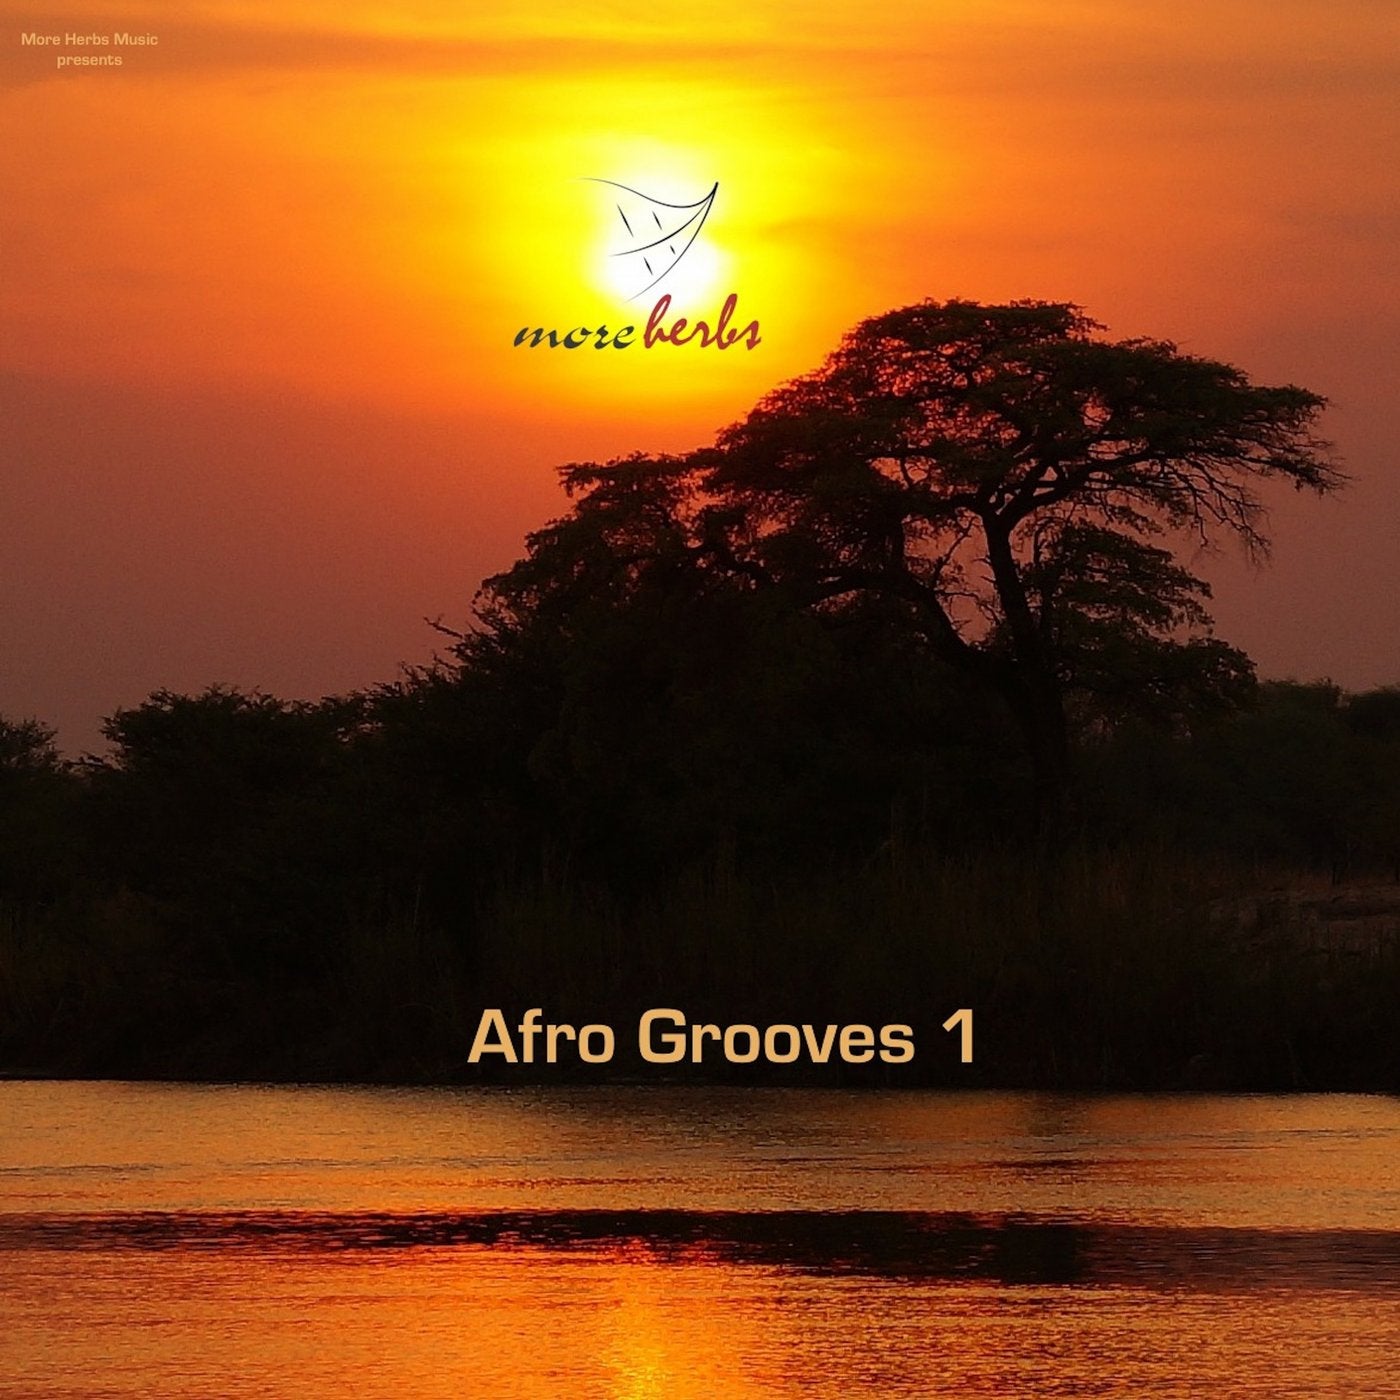 Afro Grooves 1